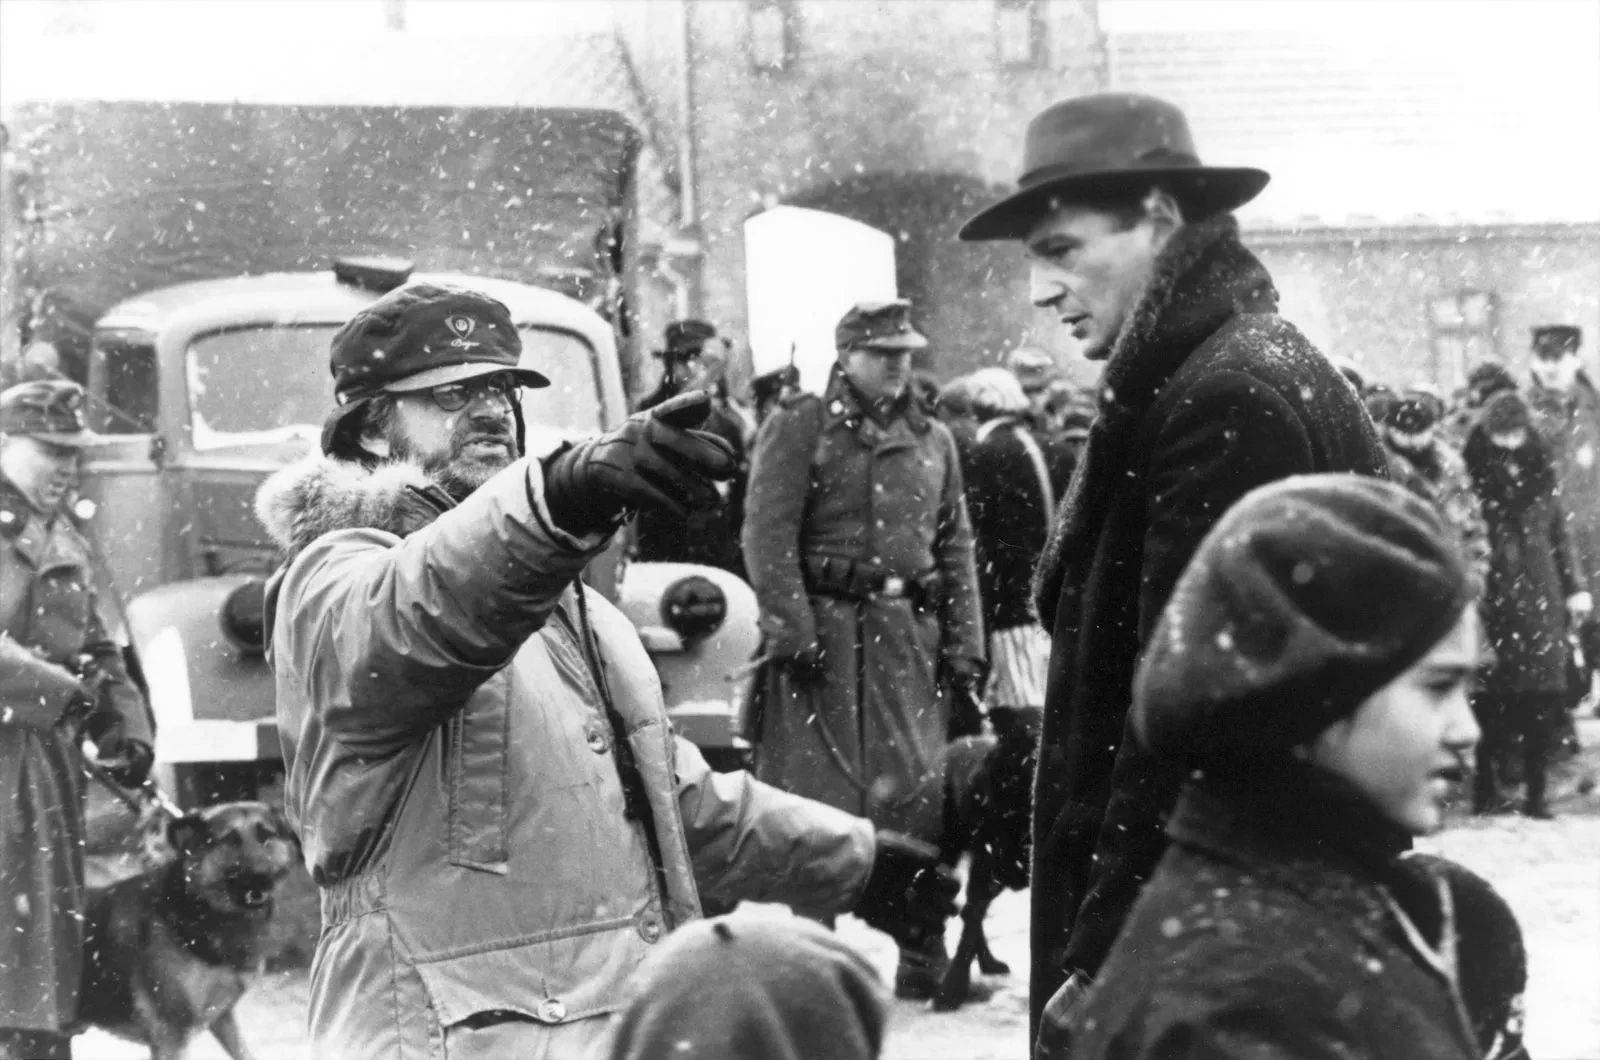 Steven Spielberg and Liam Neeson on the sets of Schindler's List | Credits: Universal Studios and Amblin Entertainment